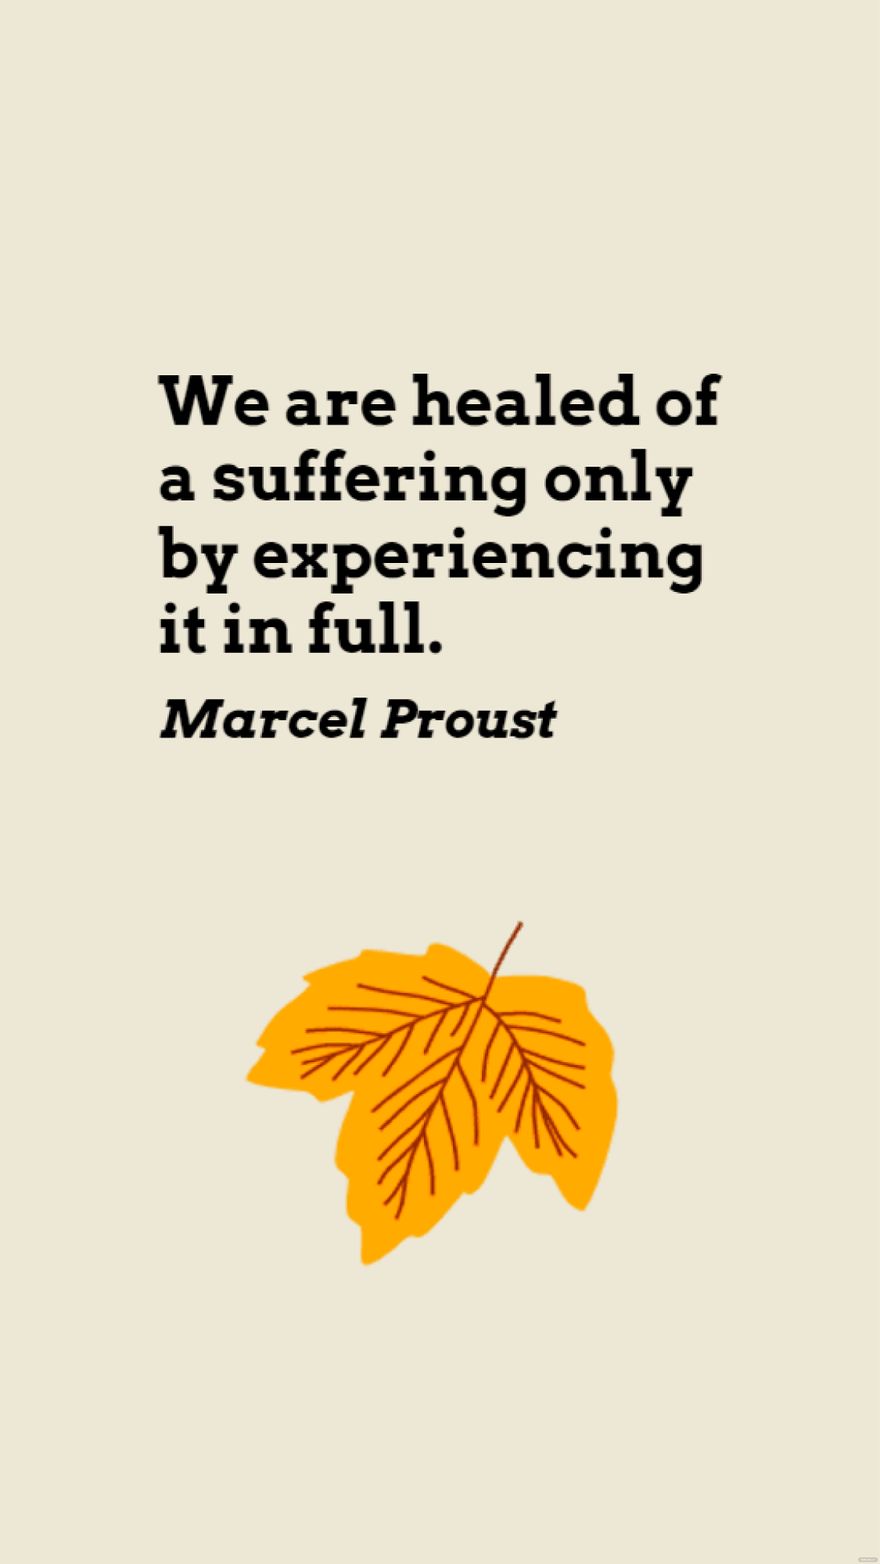 Free Marcel Proust - We are healed of a suffering only by experiencing it in full. in JPG